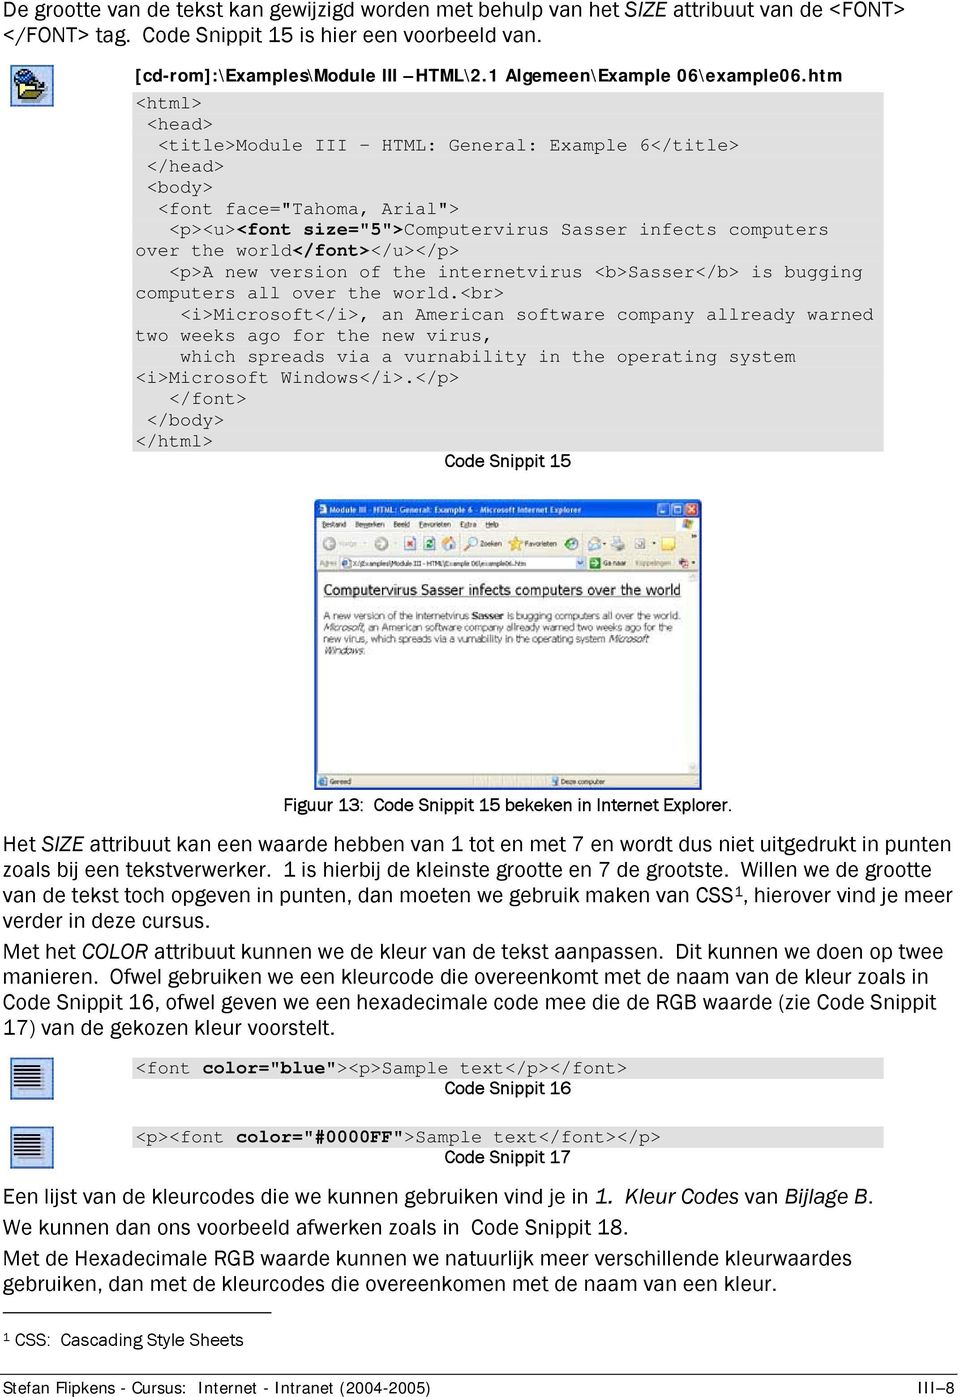 htm <title>module III - HTML: General: Example 6</title> <font face="tahoma, Arial"> <p><u><font size="5">computervirus Sasser infects computers over the world</font></u></p> <p>a new version of the